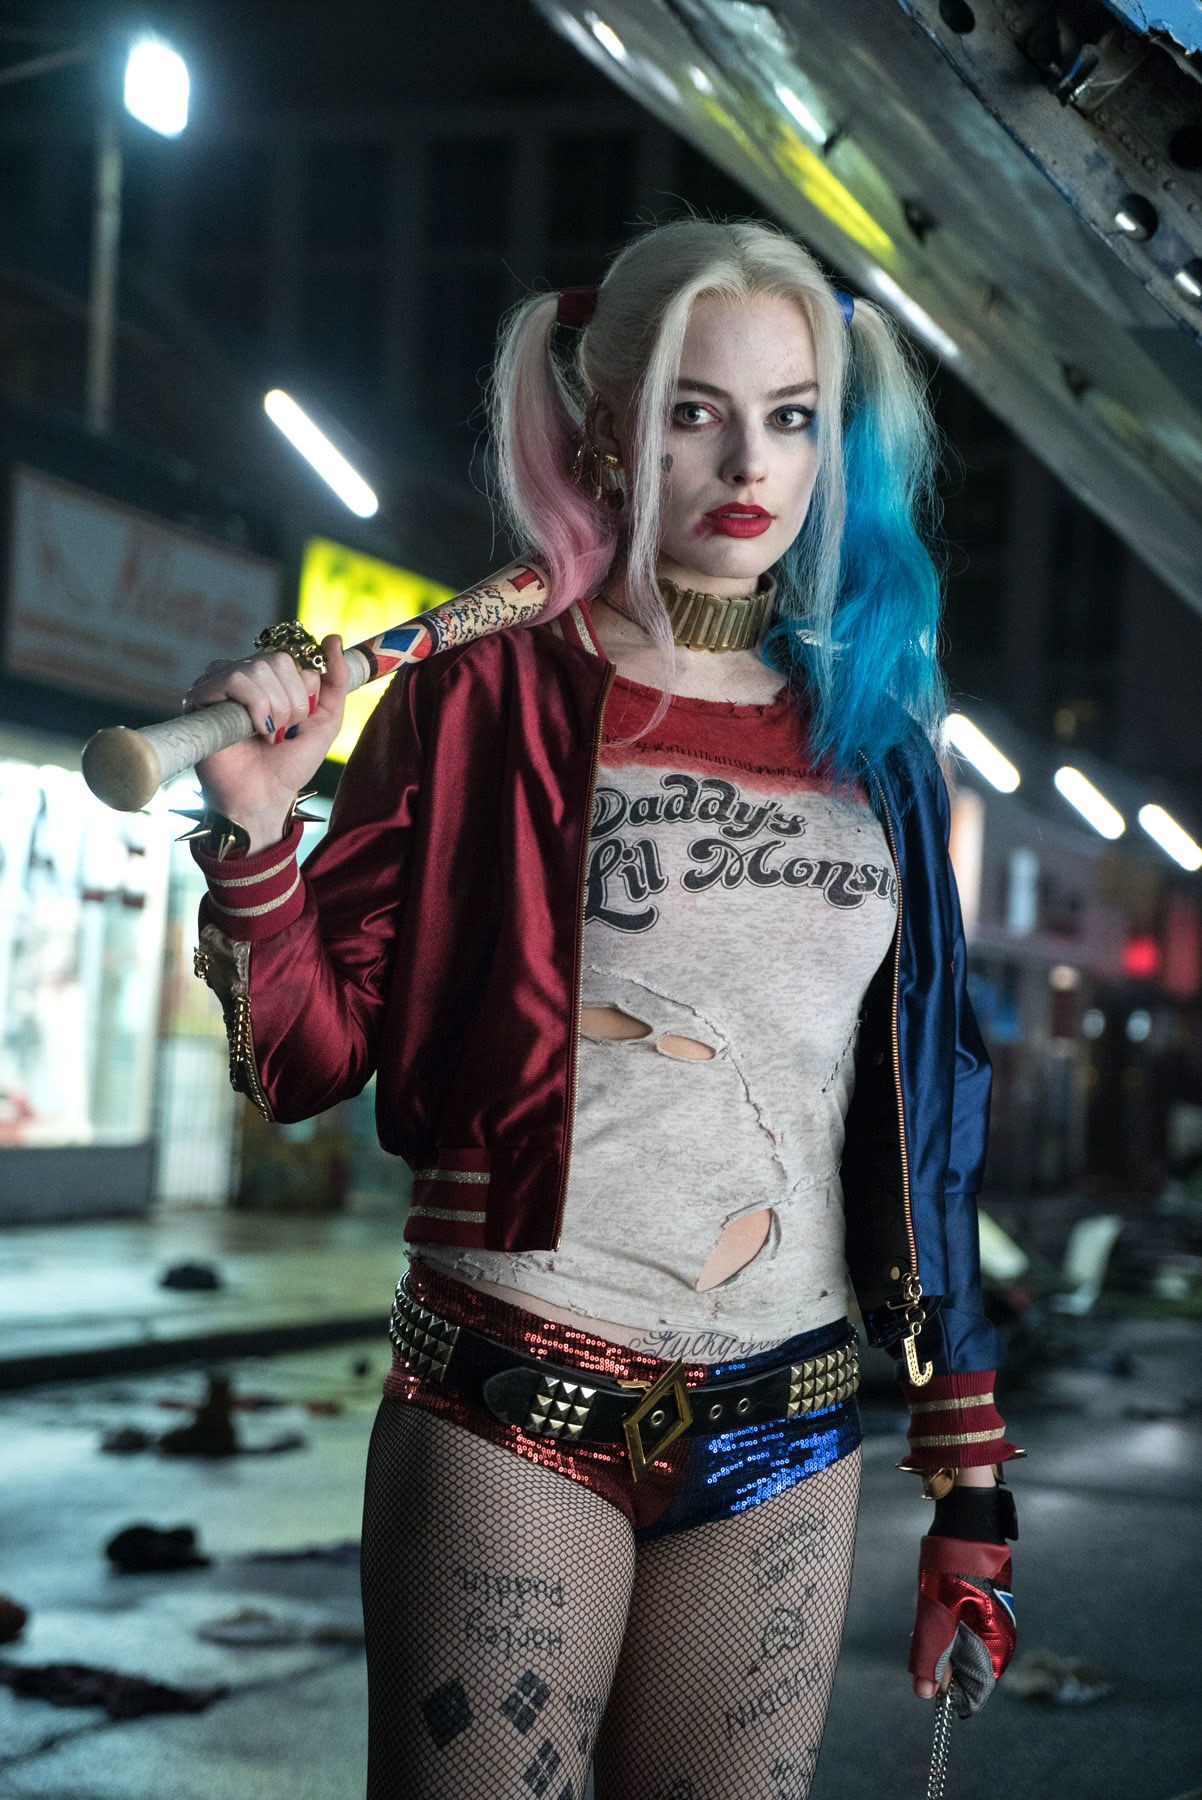 Image Suicide Squad Harley Quinn August 3 2016 Dc Movies Wiki Fandom Powered By Wikia